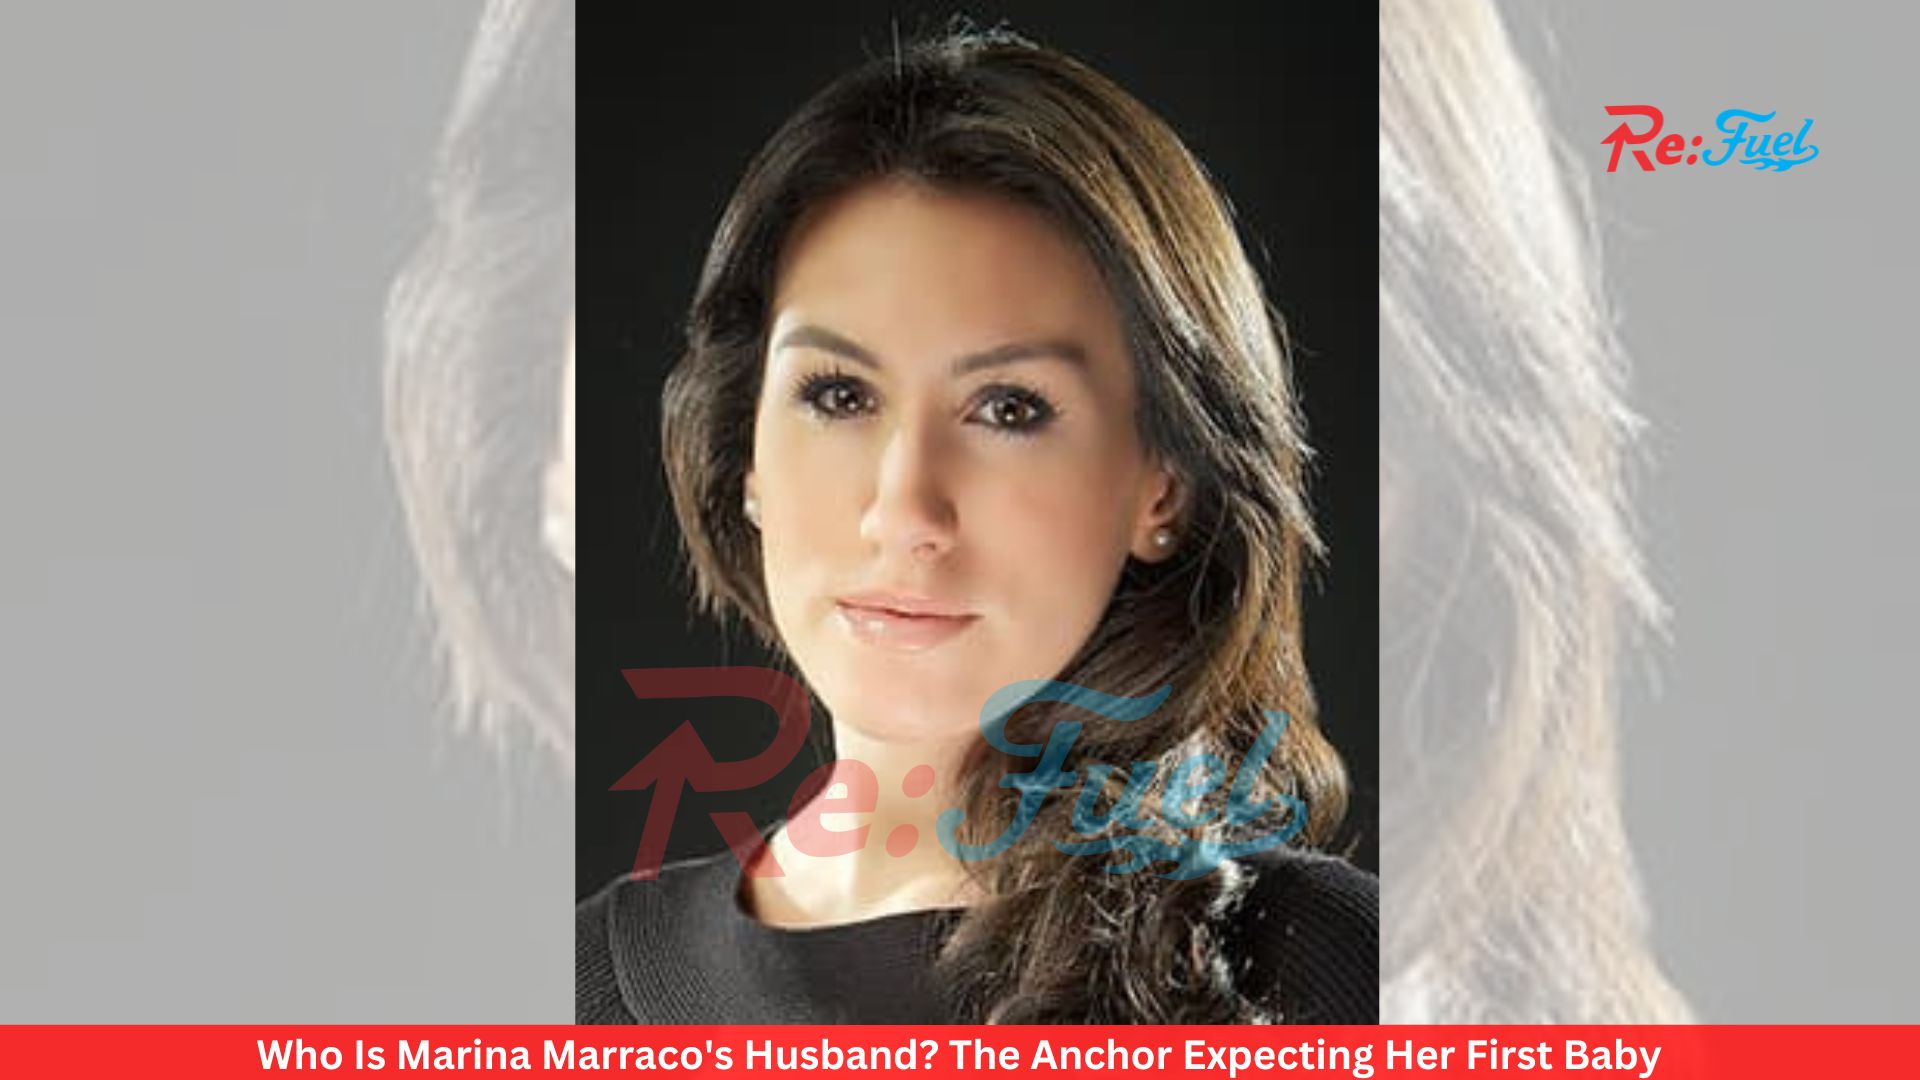 Who Is Marina Marraco's Husband? The Anchor Expecting Her First Baby